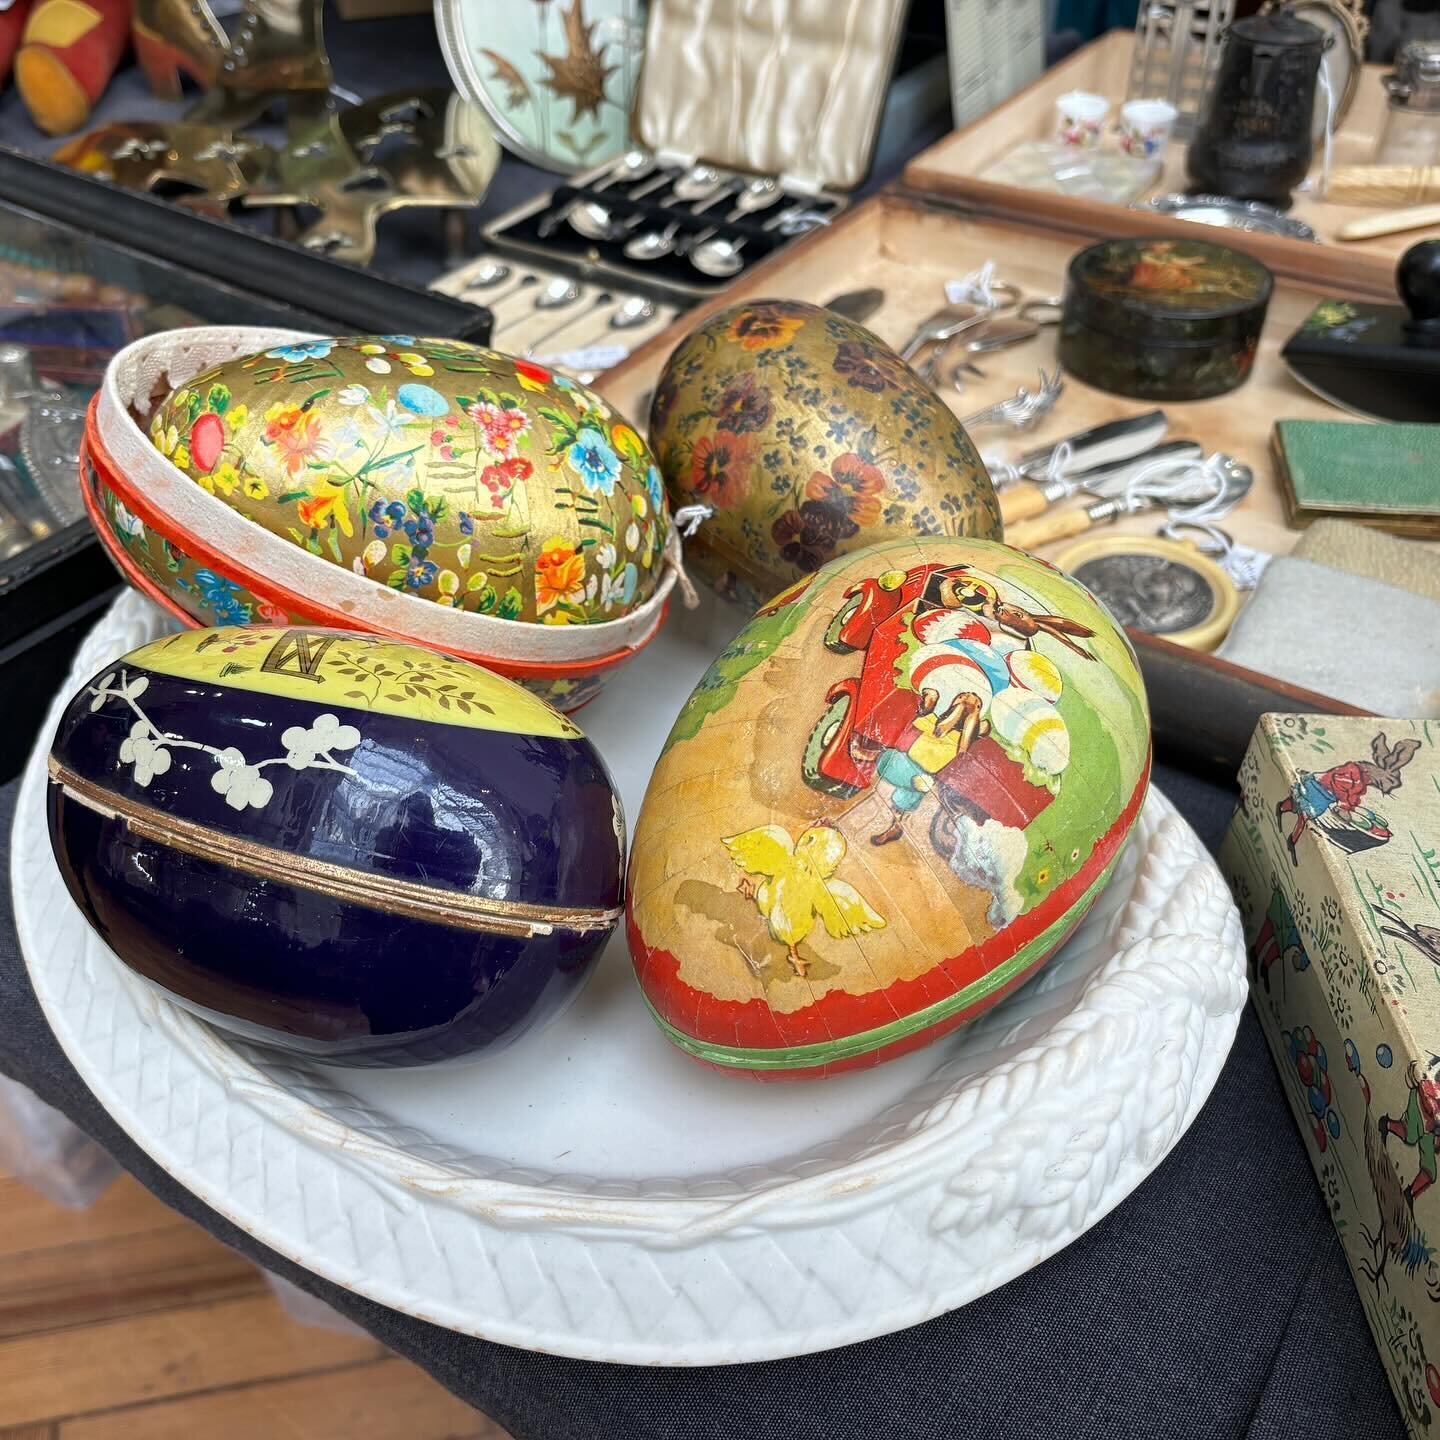 Happy Easter 🪺🌸🪺 A few photos from last weekend&rsquo;s antiques fair ~ we will be back on the 21st April at @the_rhh Lindley Hall 🌿

#adamsantiquesfairs #antiquesfairs #London